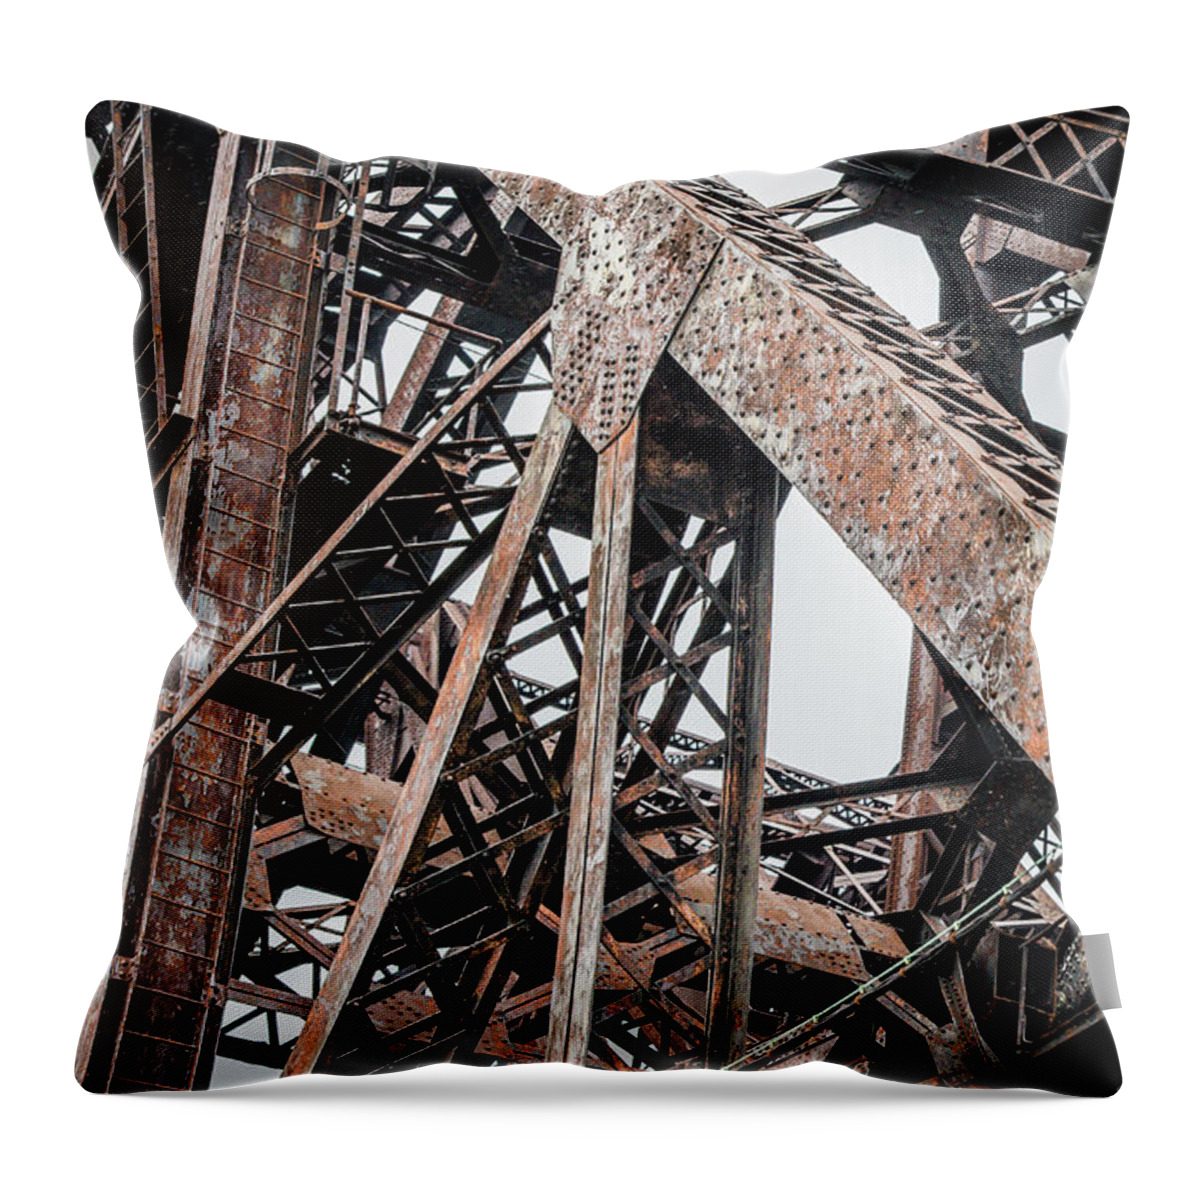 Chicago Throw Pillow featuring the photograph Rusty Iron by Anthony Doudt